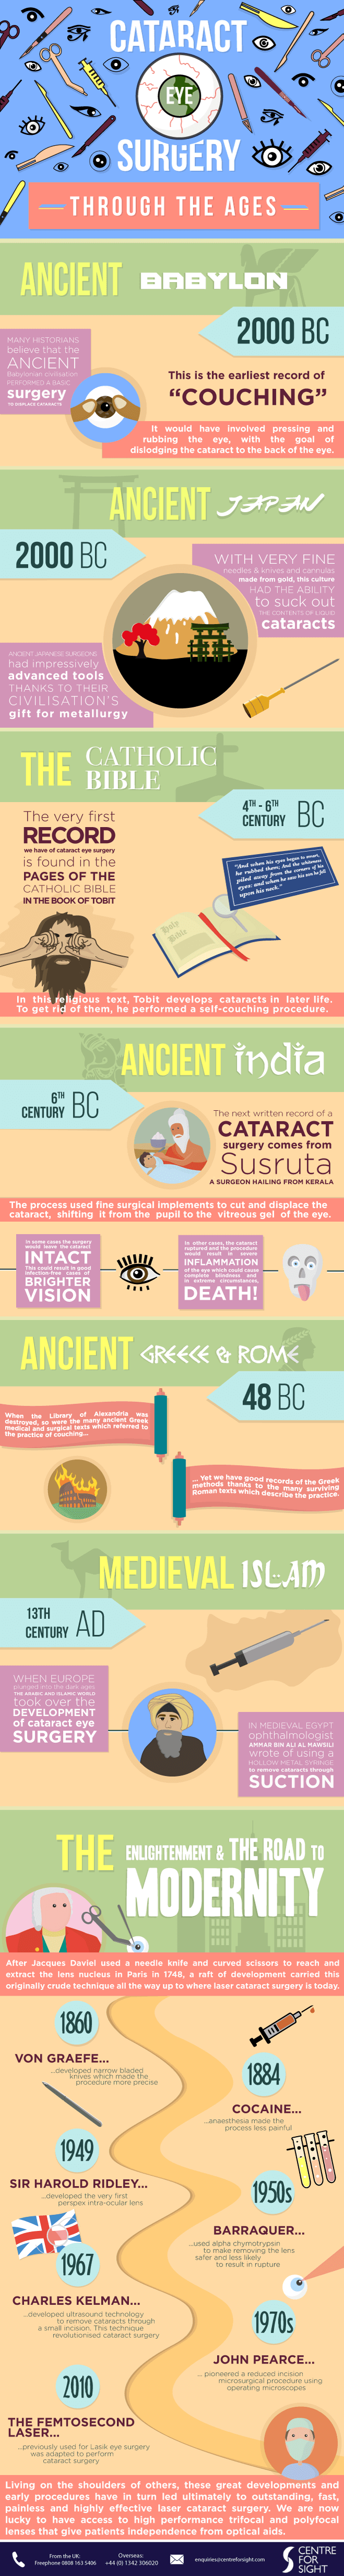 Infographic – History of Cataract Surgery